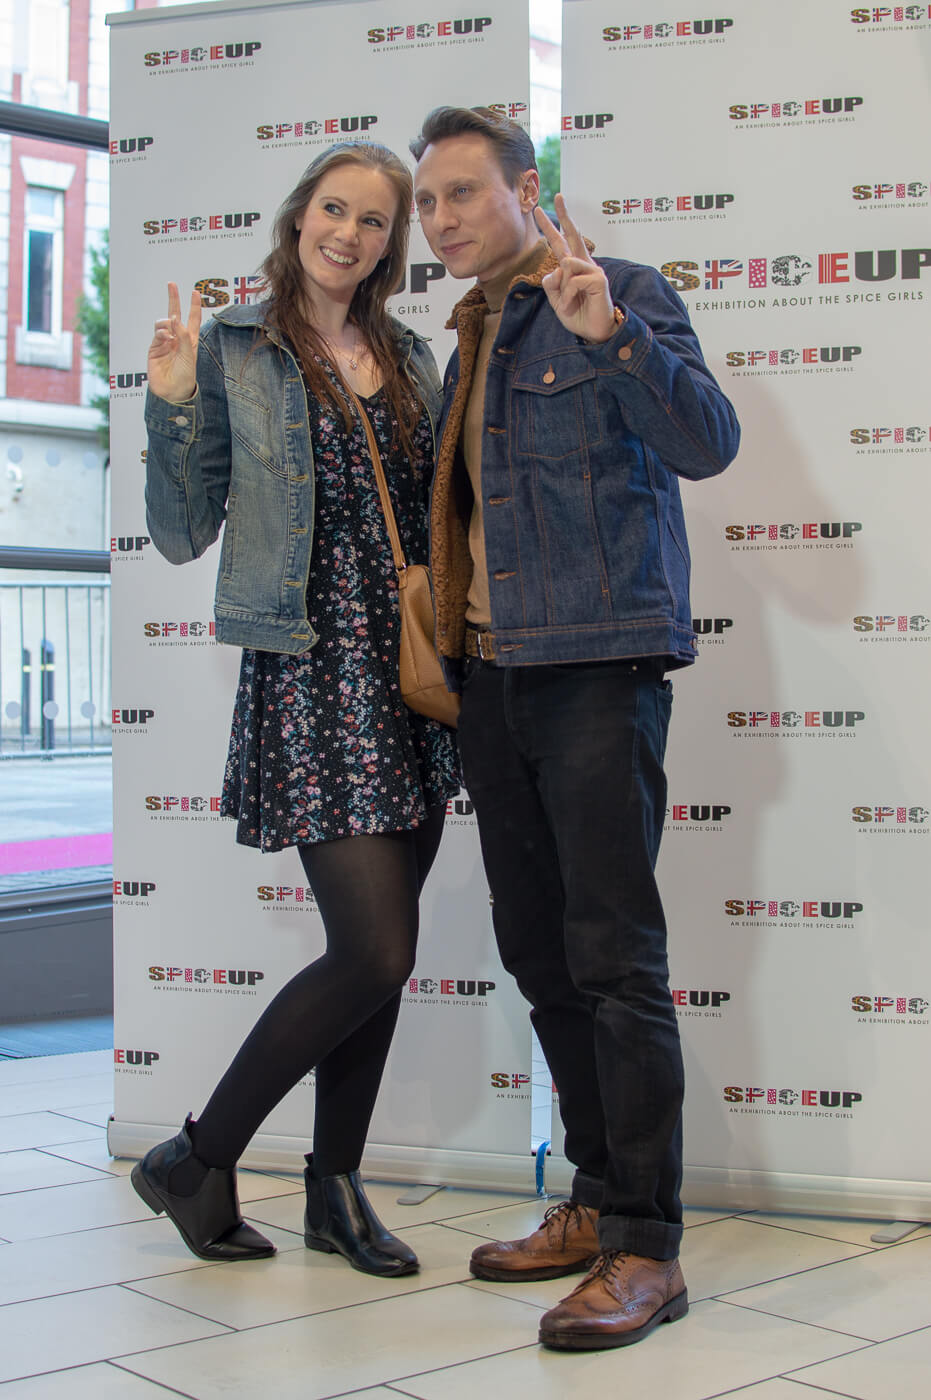 Spice Up Manchester launches at Manchester Central Convention Centre